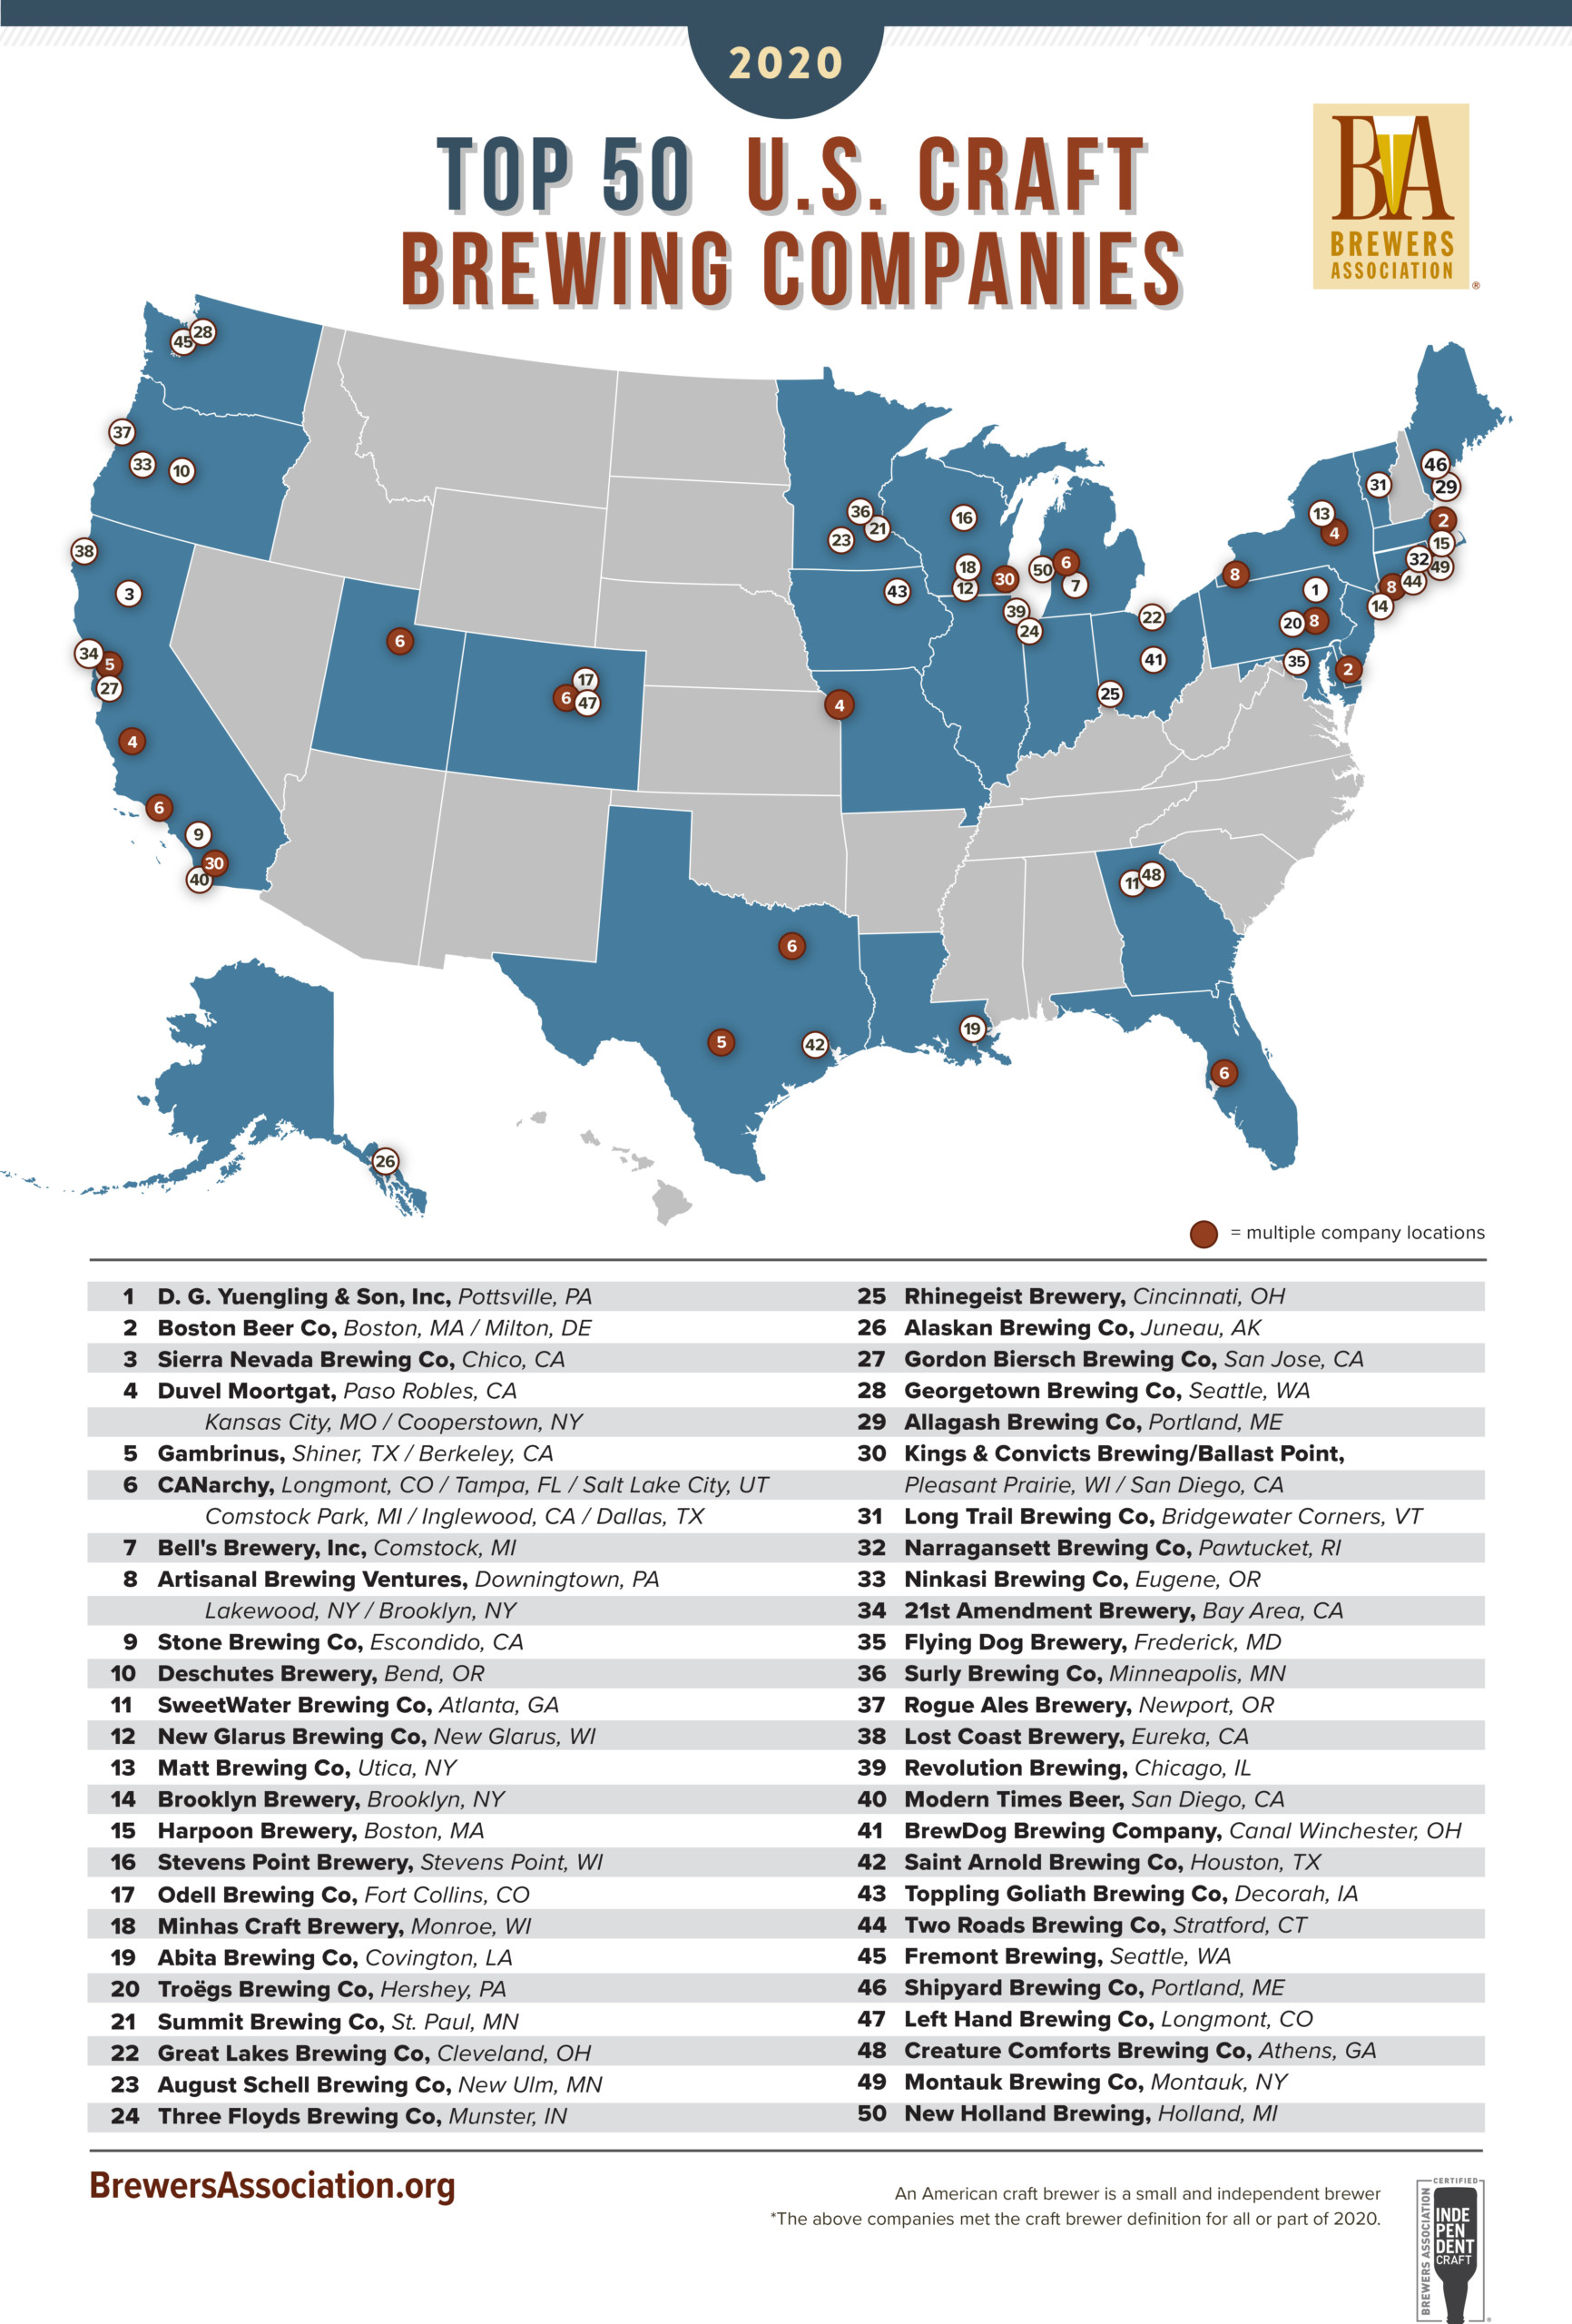 The Official Top 50 Craft Brewing Companies of 2020